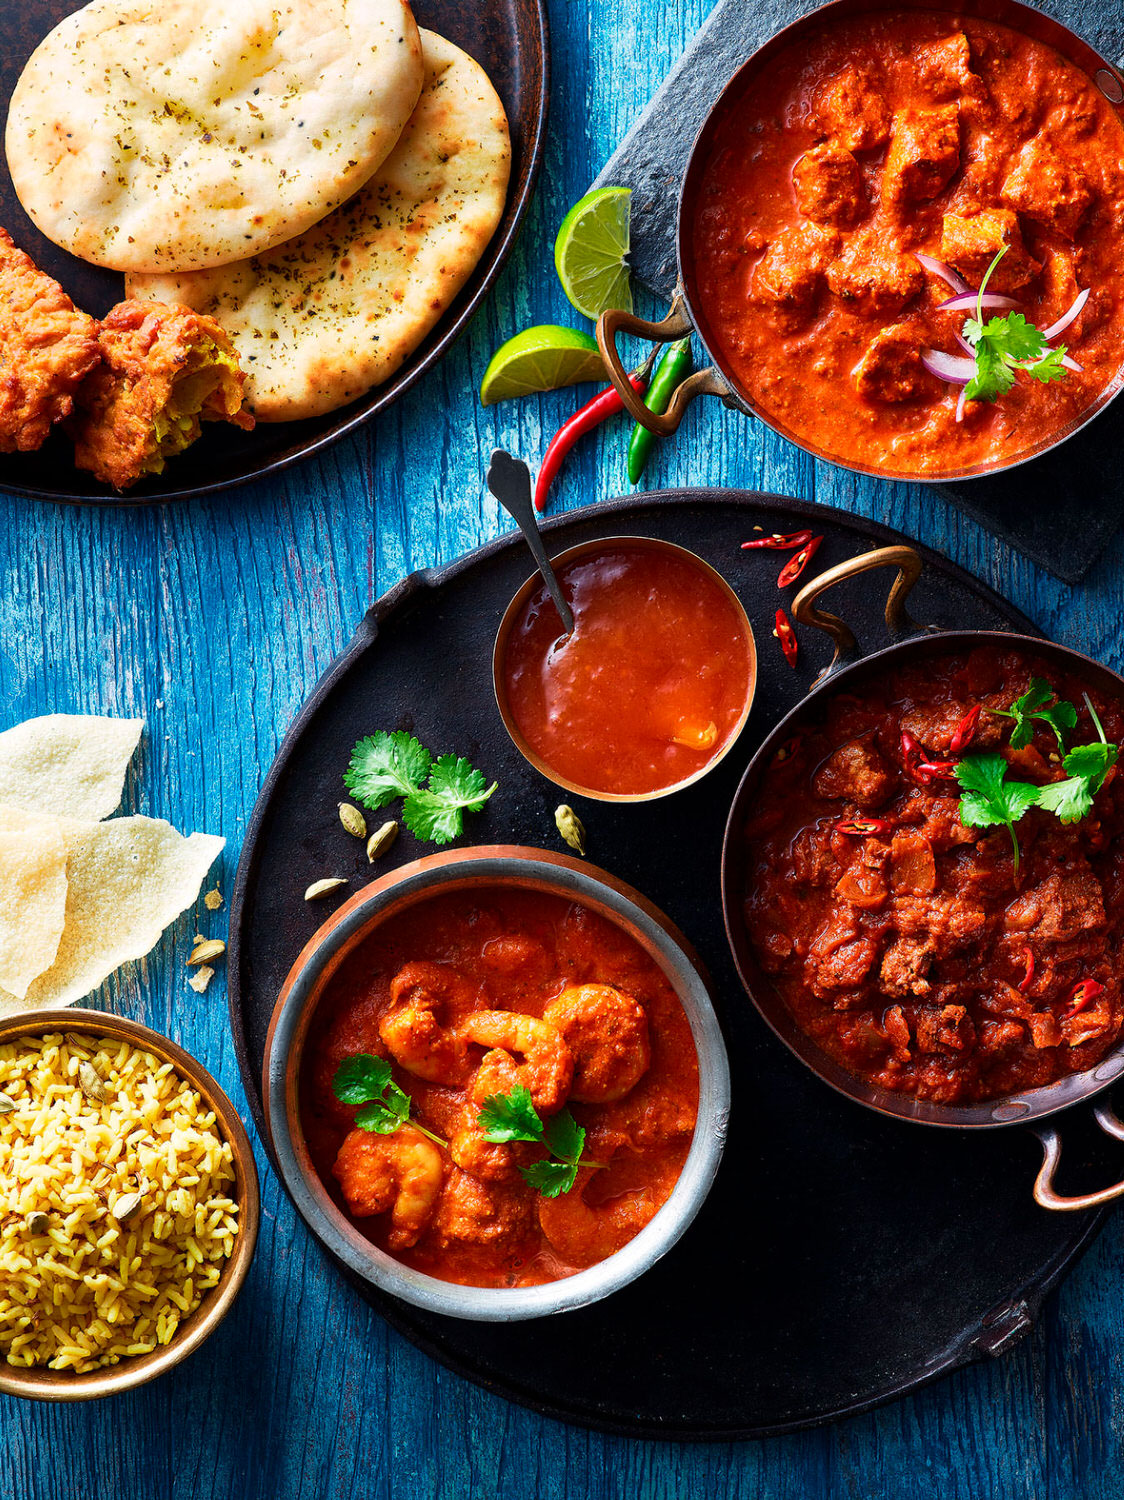 Lidl Deluxe Curries served with mini naan breads and fresh coriander